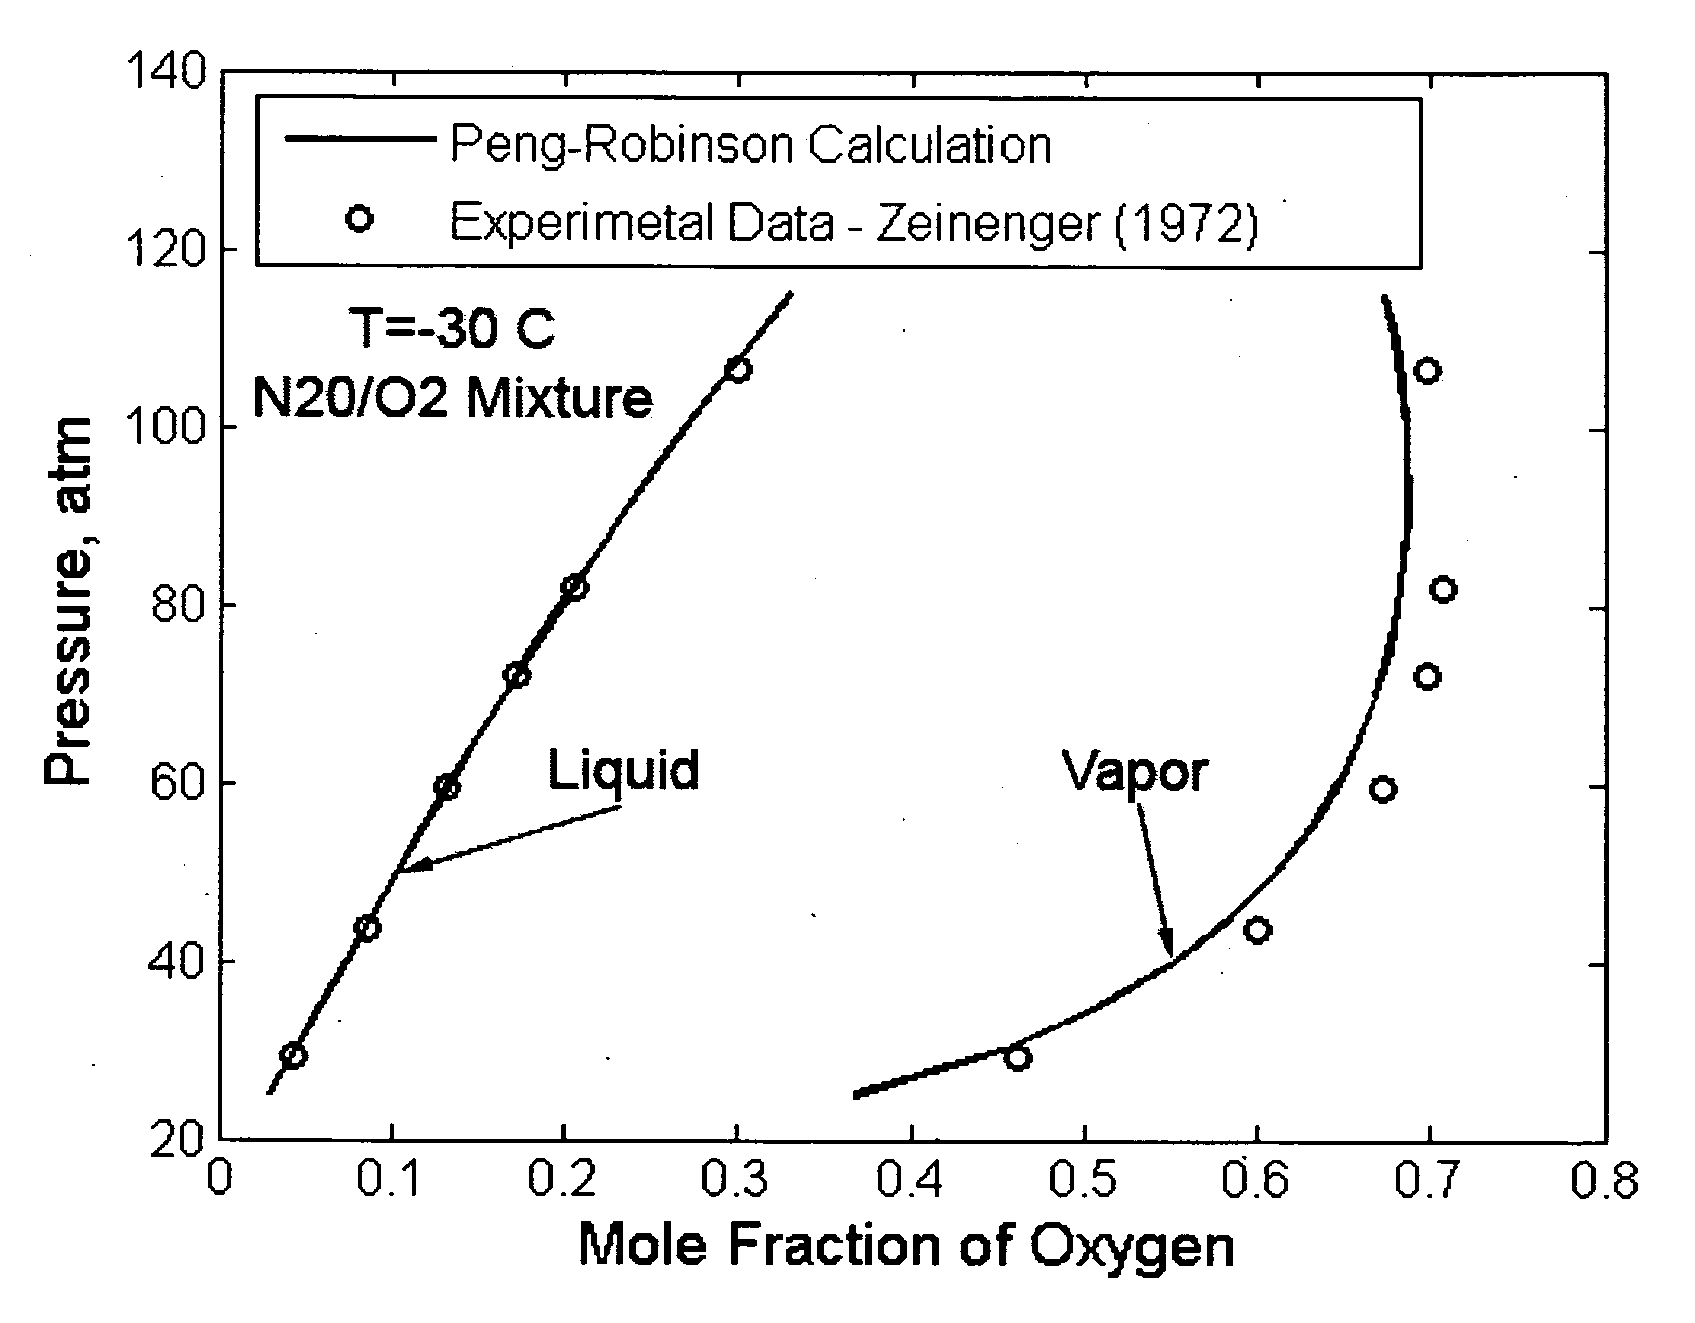 Mixtures of oxides of nitrogen and oxygen as oxidizers for propulsion, gas generation and power generation applications